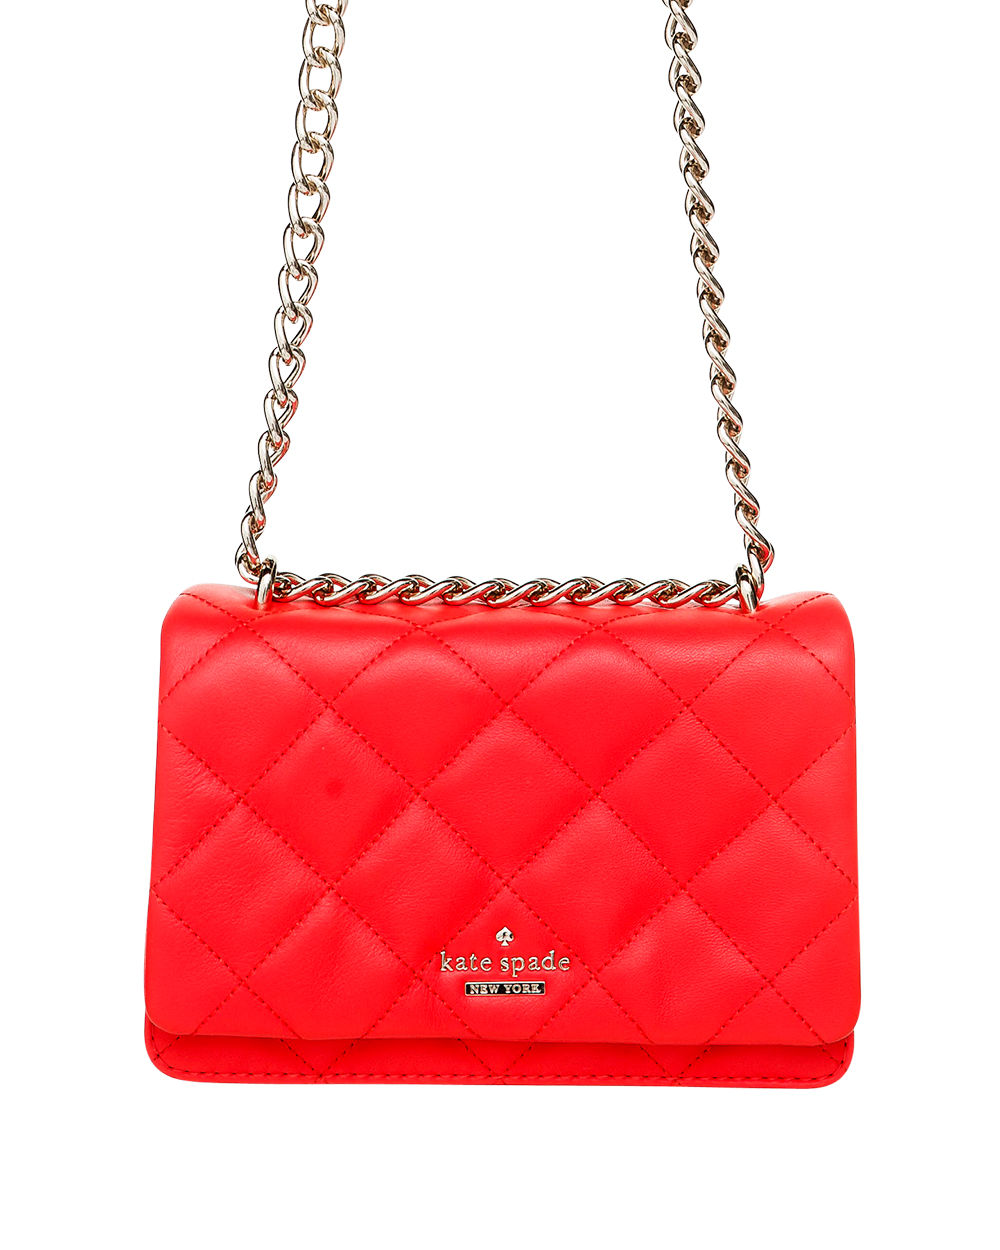 Kate Spade bag, $575, from T by DFS Galleria